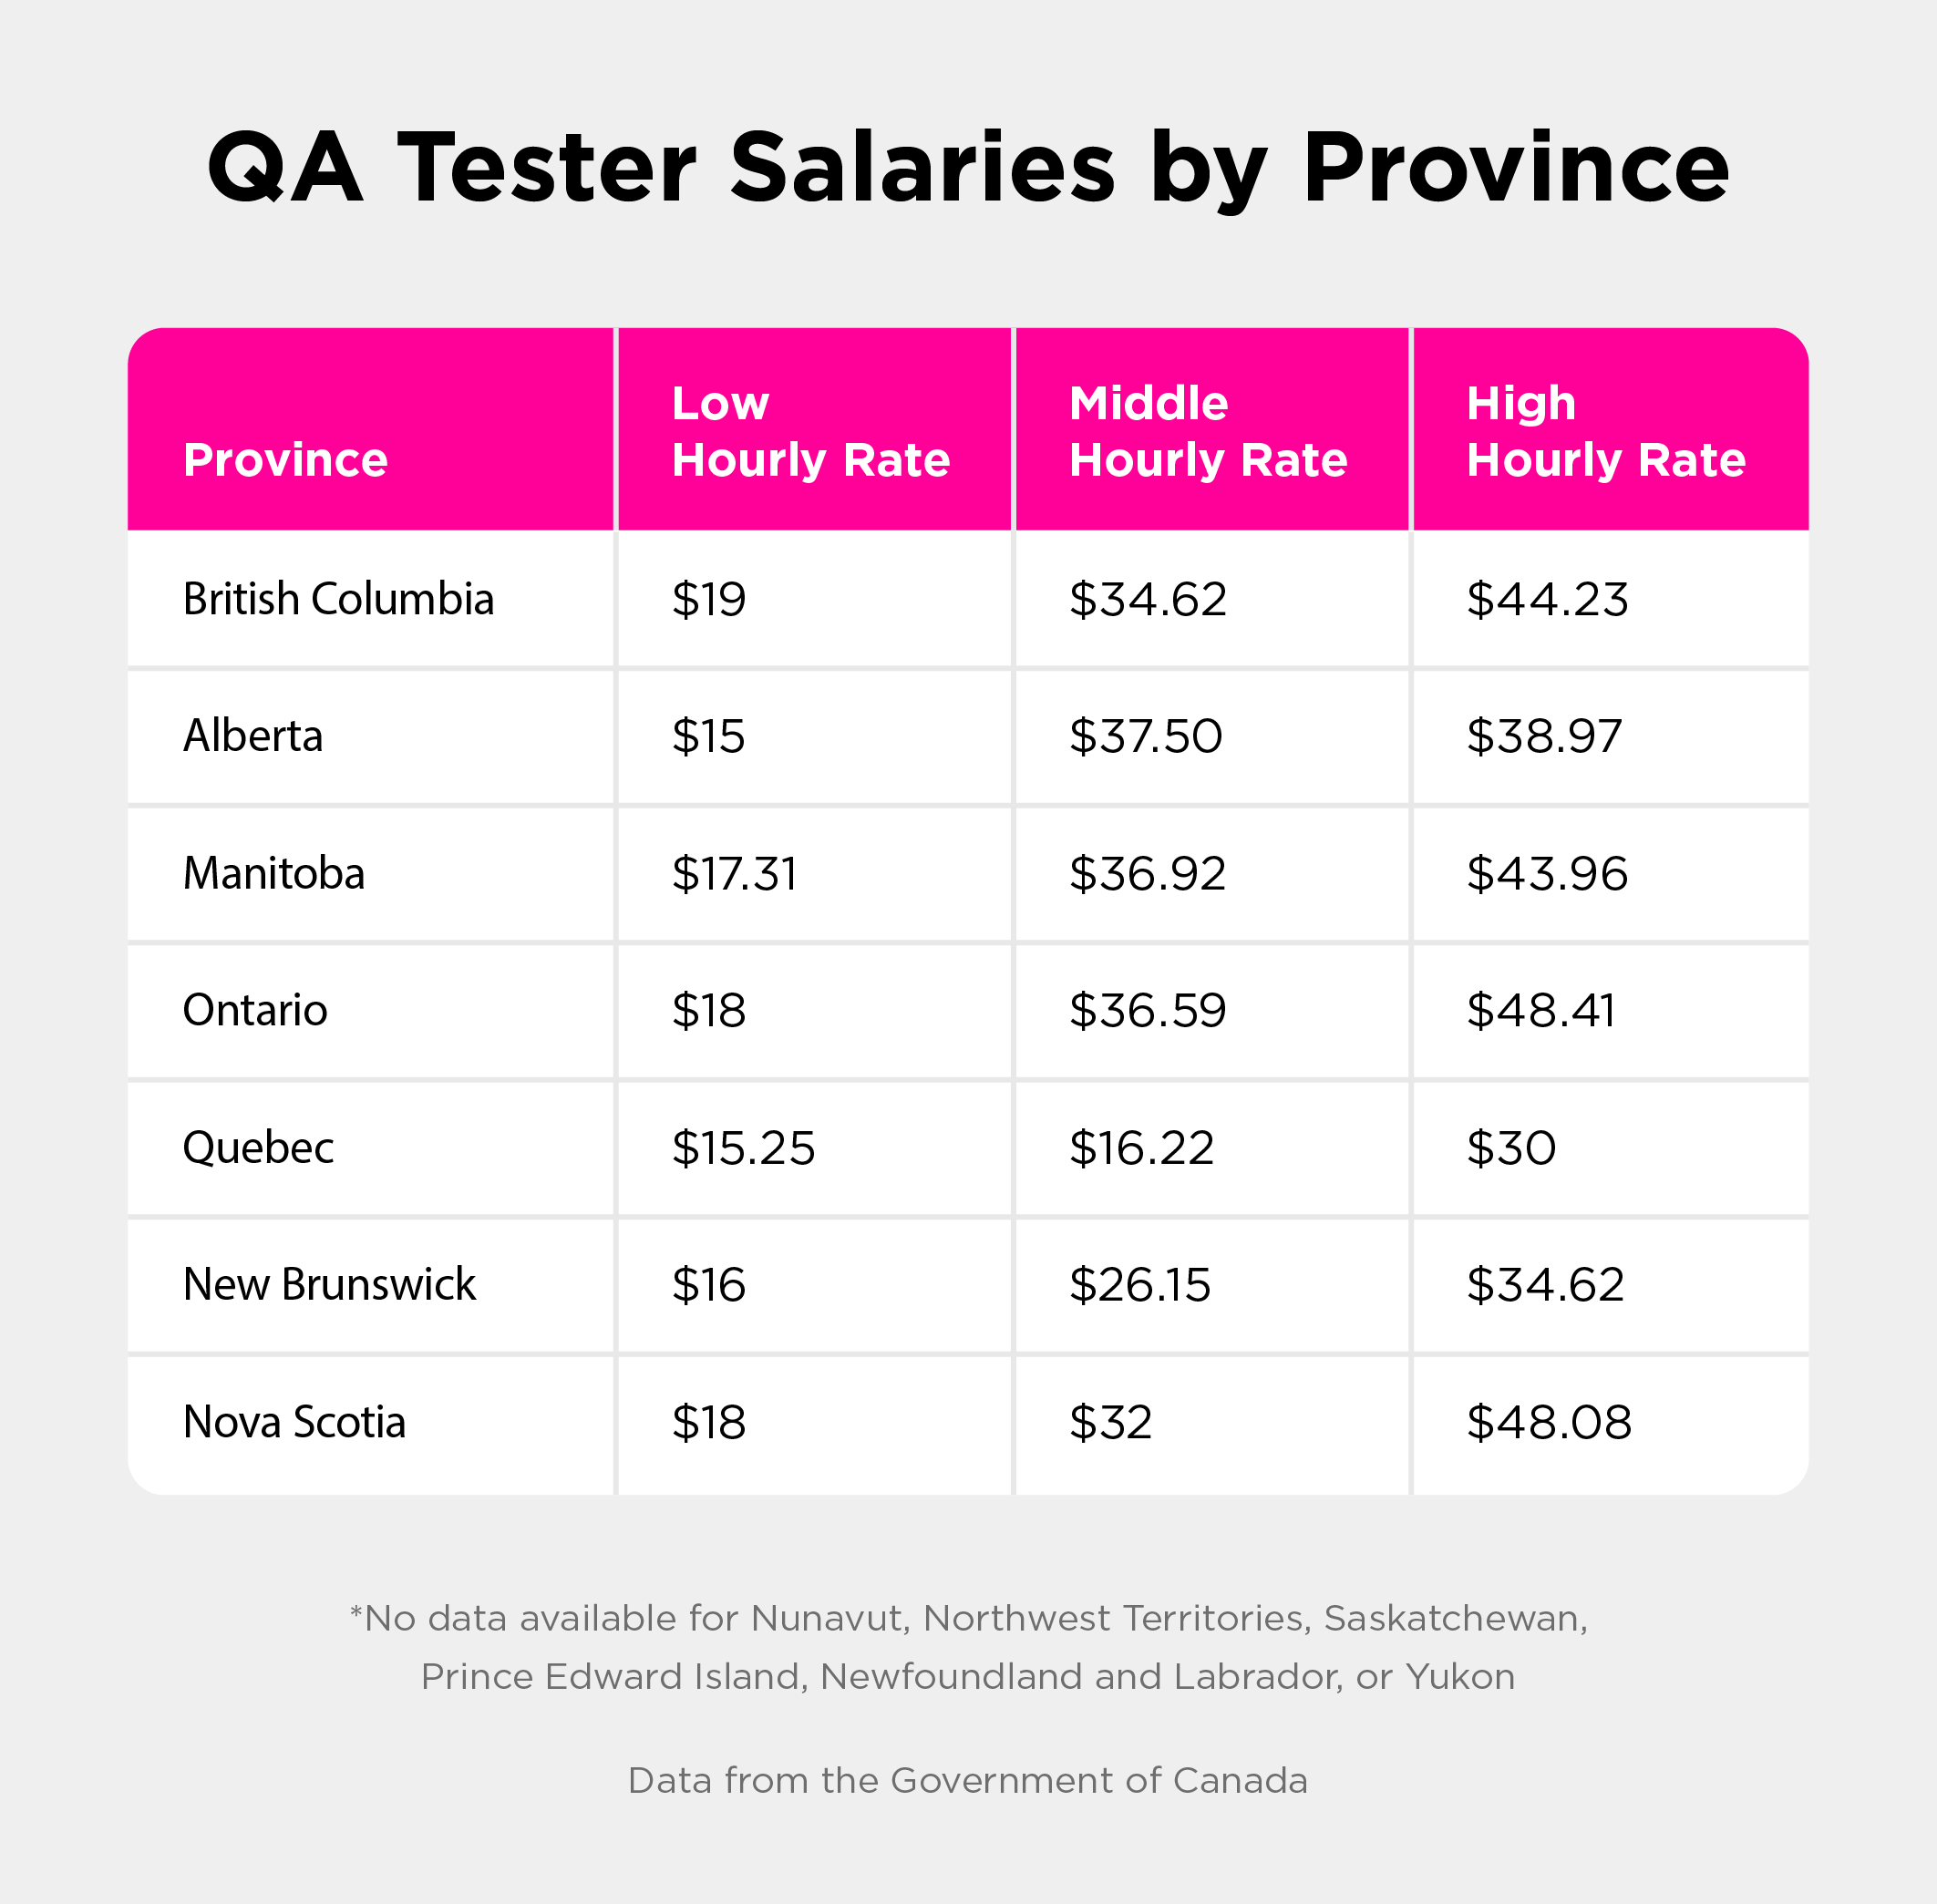 Chart showing the pay breakdown for QA Testers in different provinces of Canada.